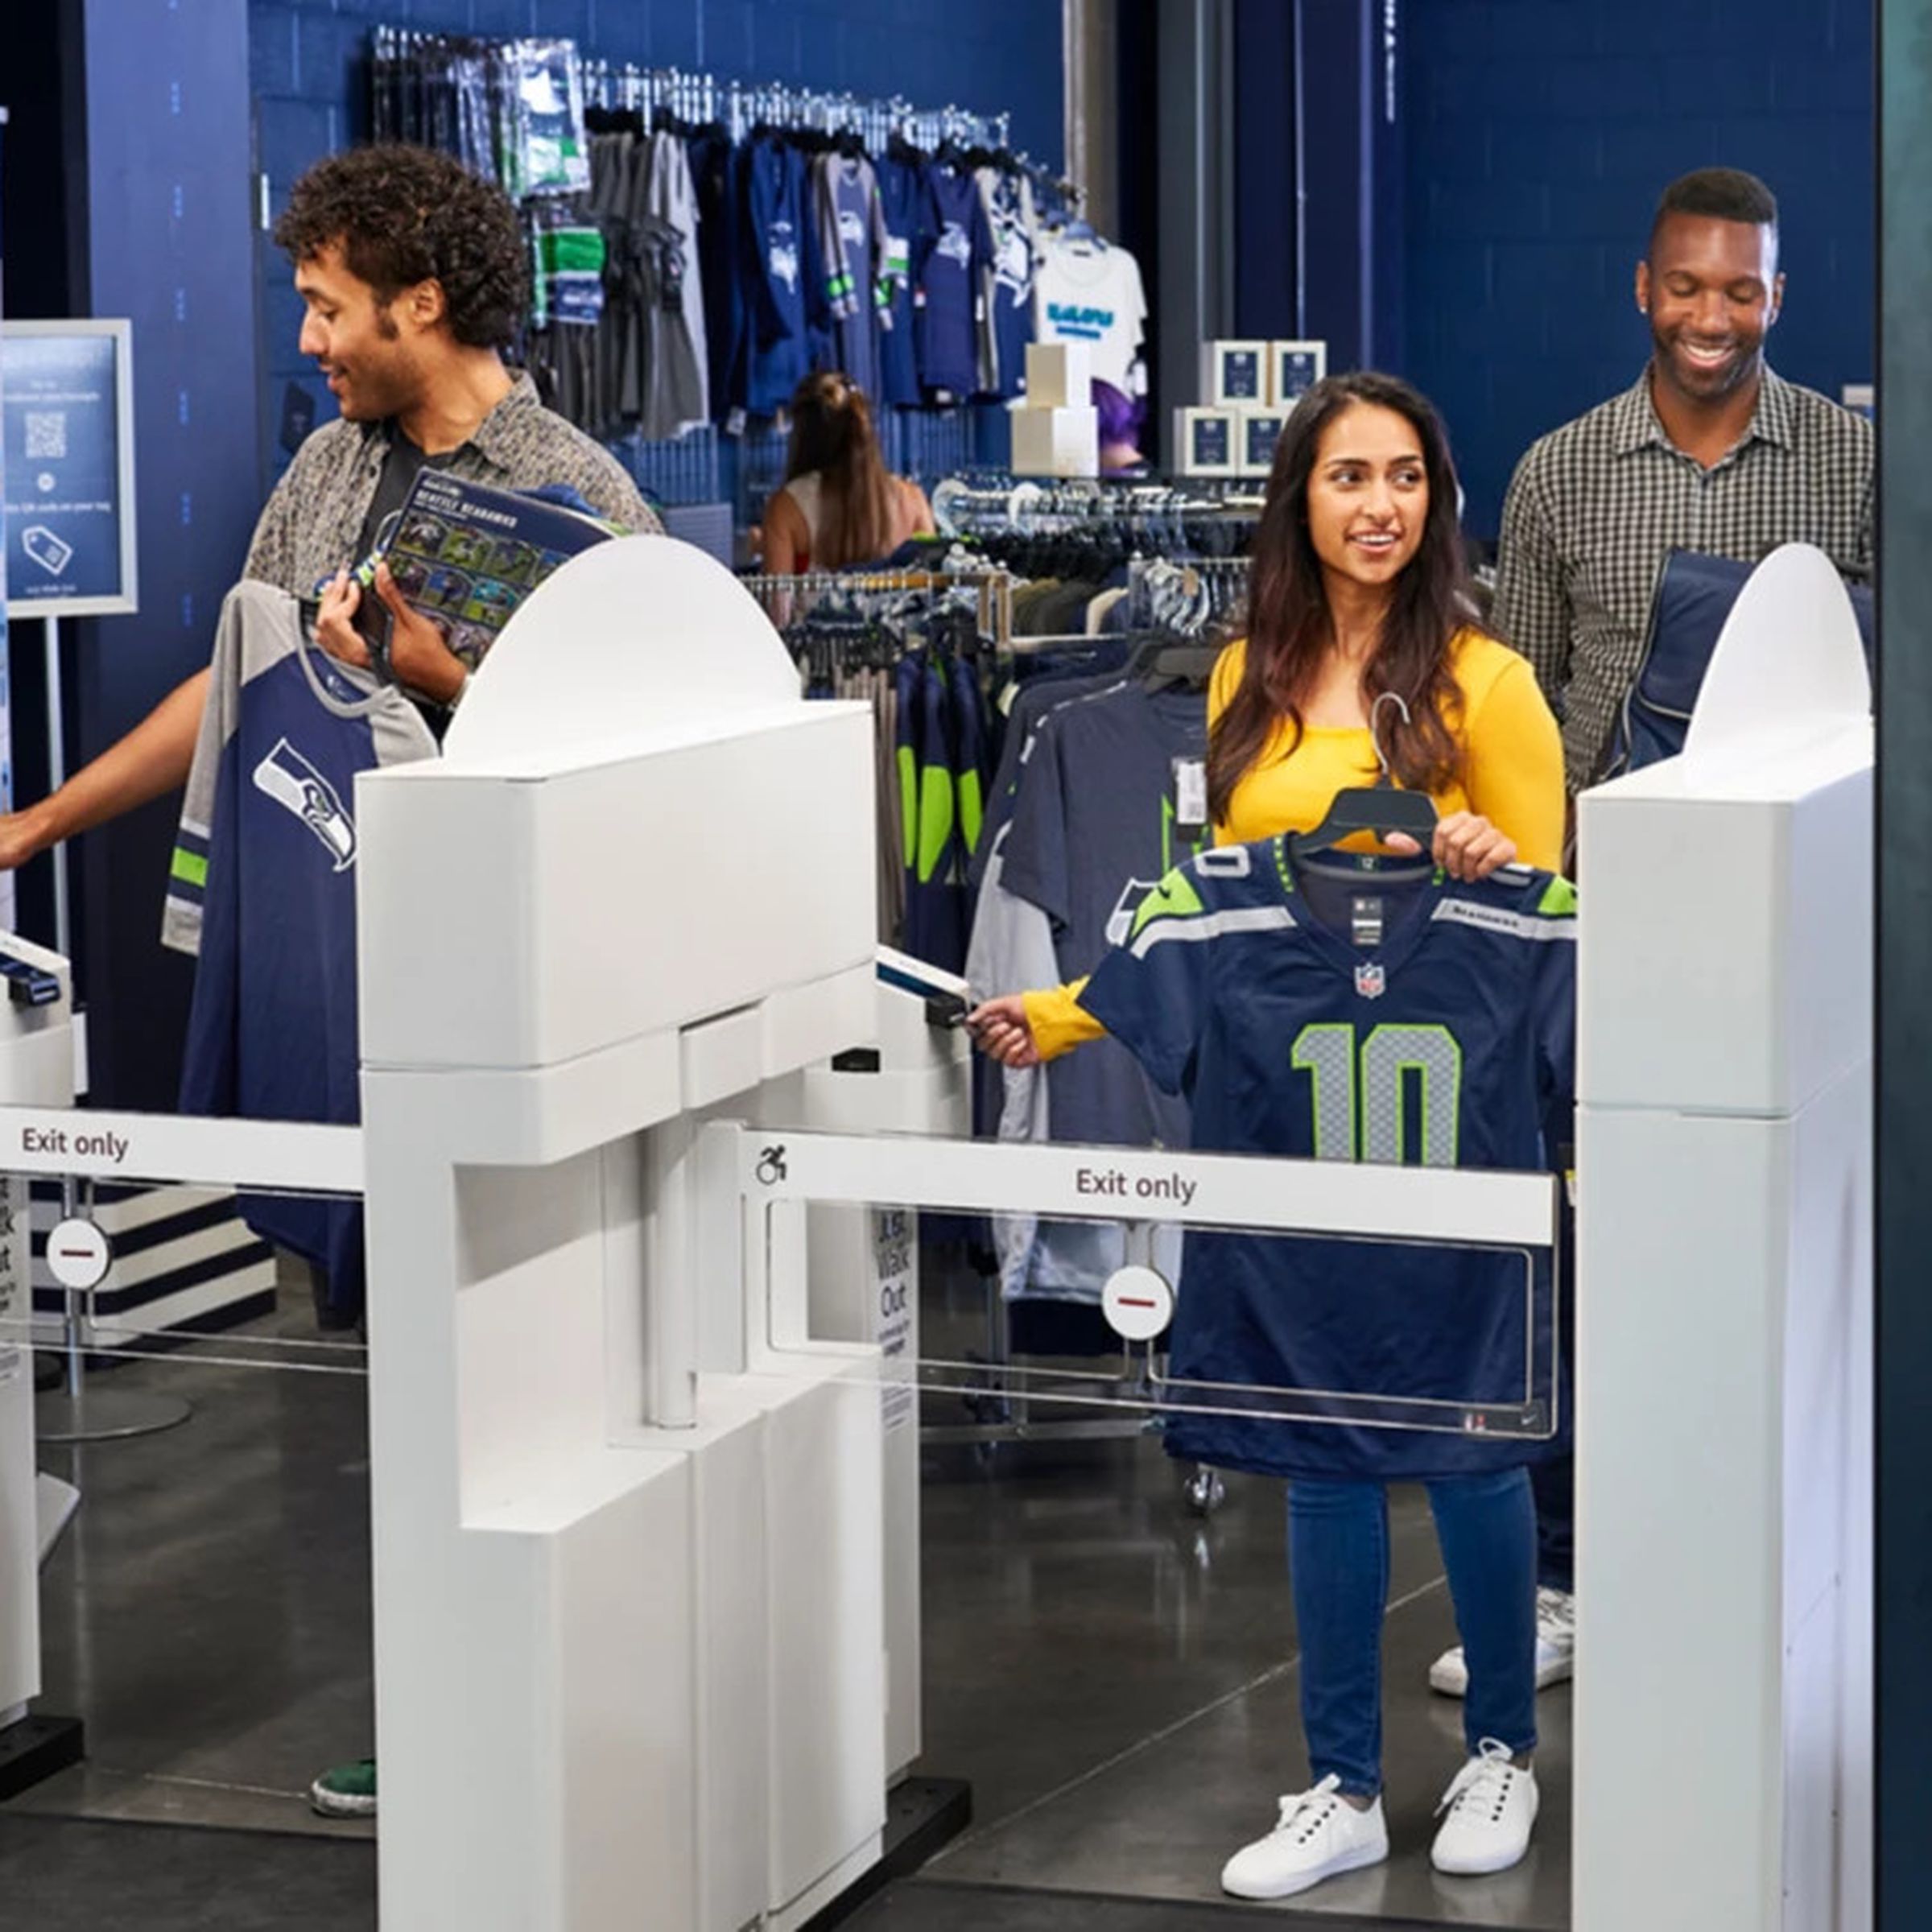 A photo showing people using Amazon’s Just Walk Out technology in a sports store